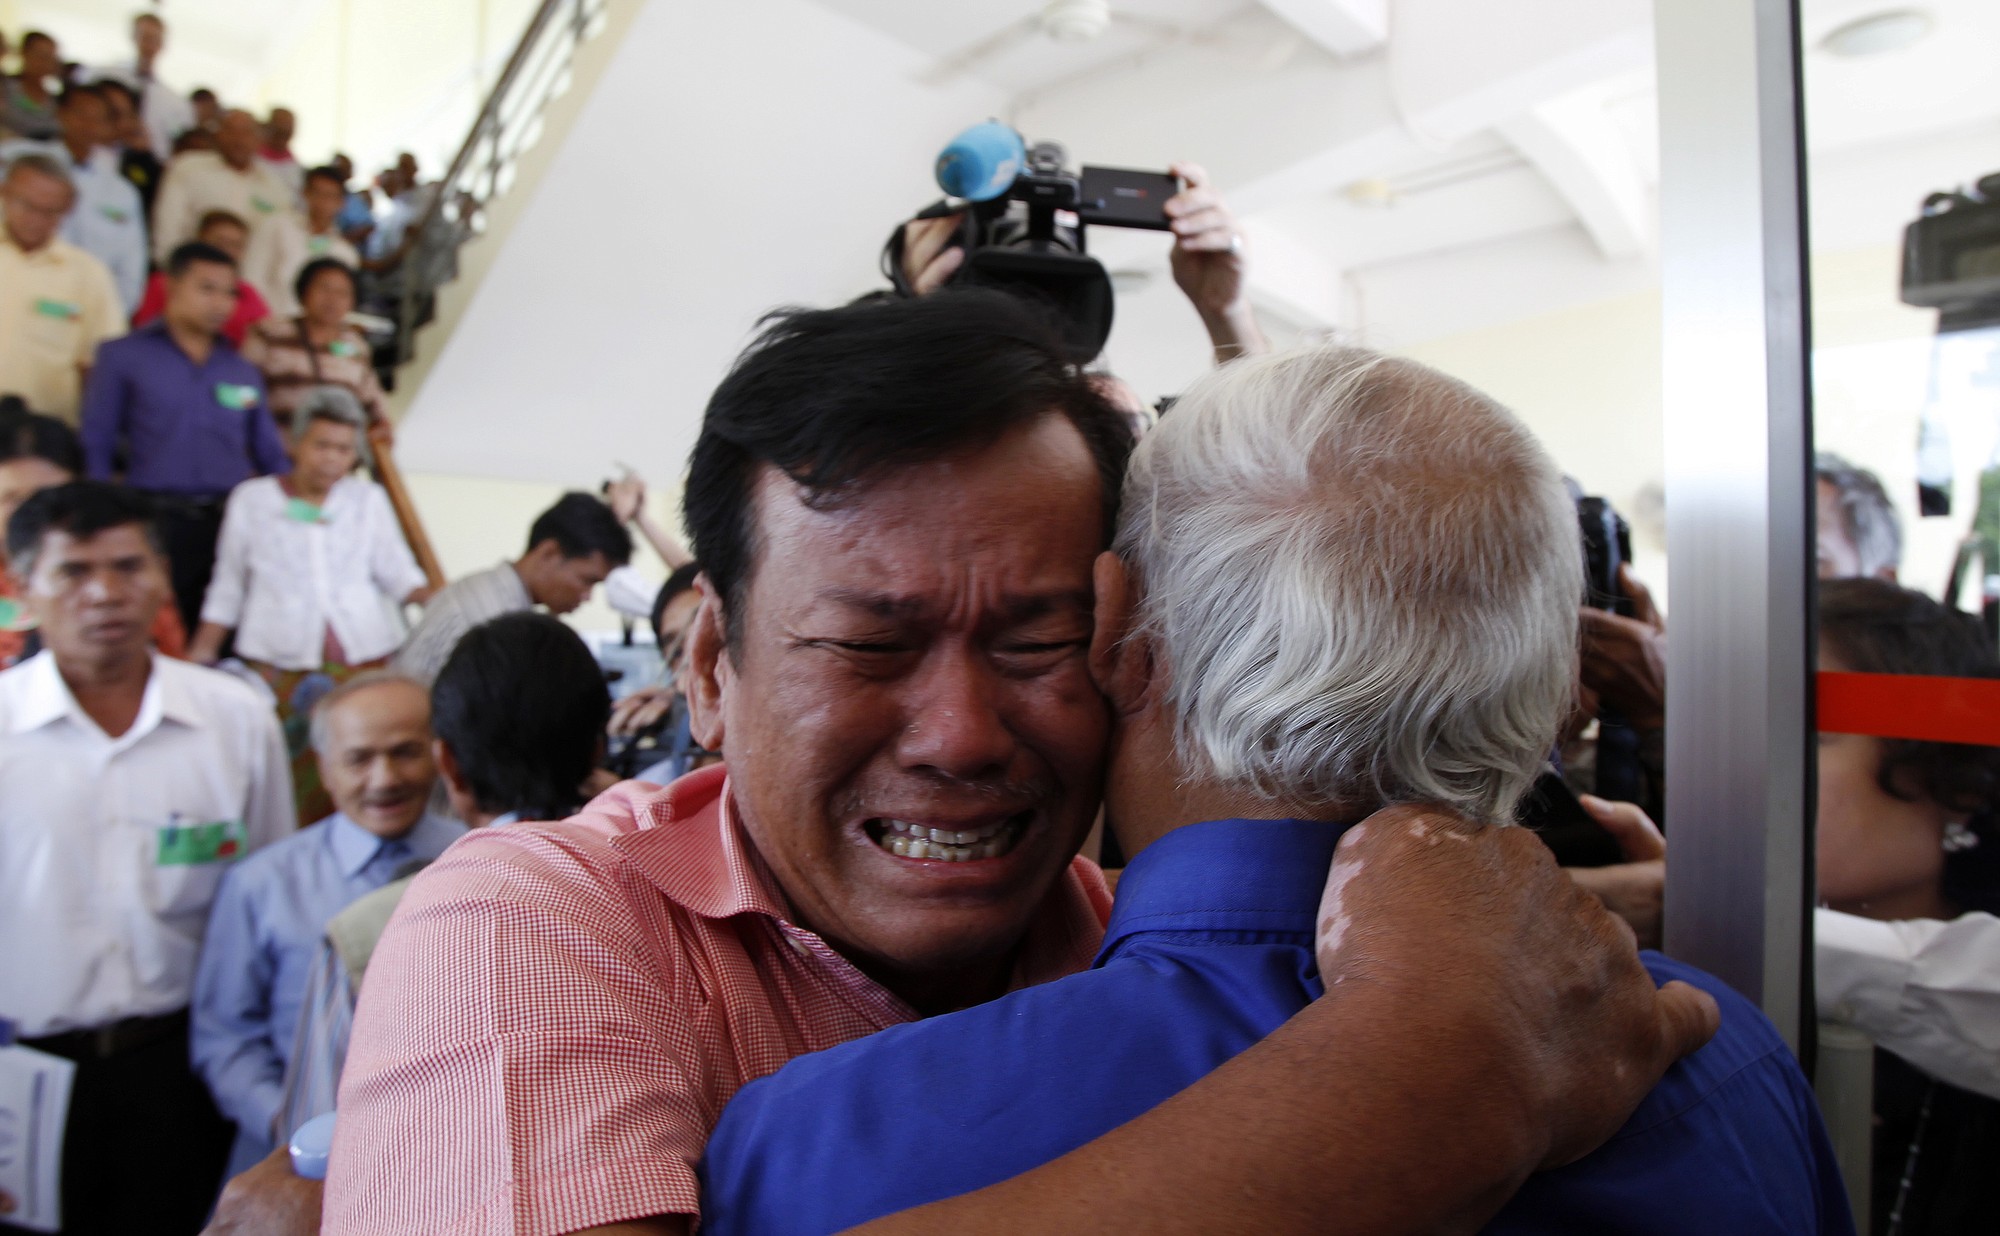 Cambodian former Khmer Rouge survivors, Soum Rithy, left, and Chum Mey, right, embrace each other after the verdicts were announced, at the U.N.-backed war crimes tribunal in Phnom Penh, Cambodia, on Thursday.